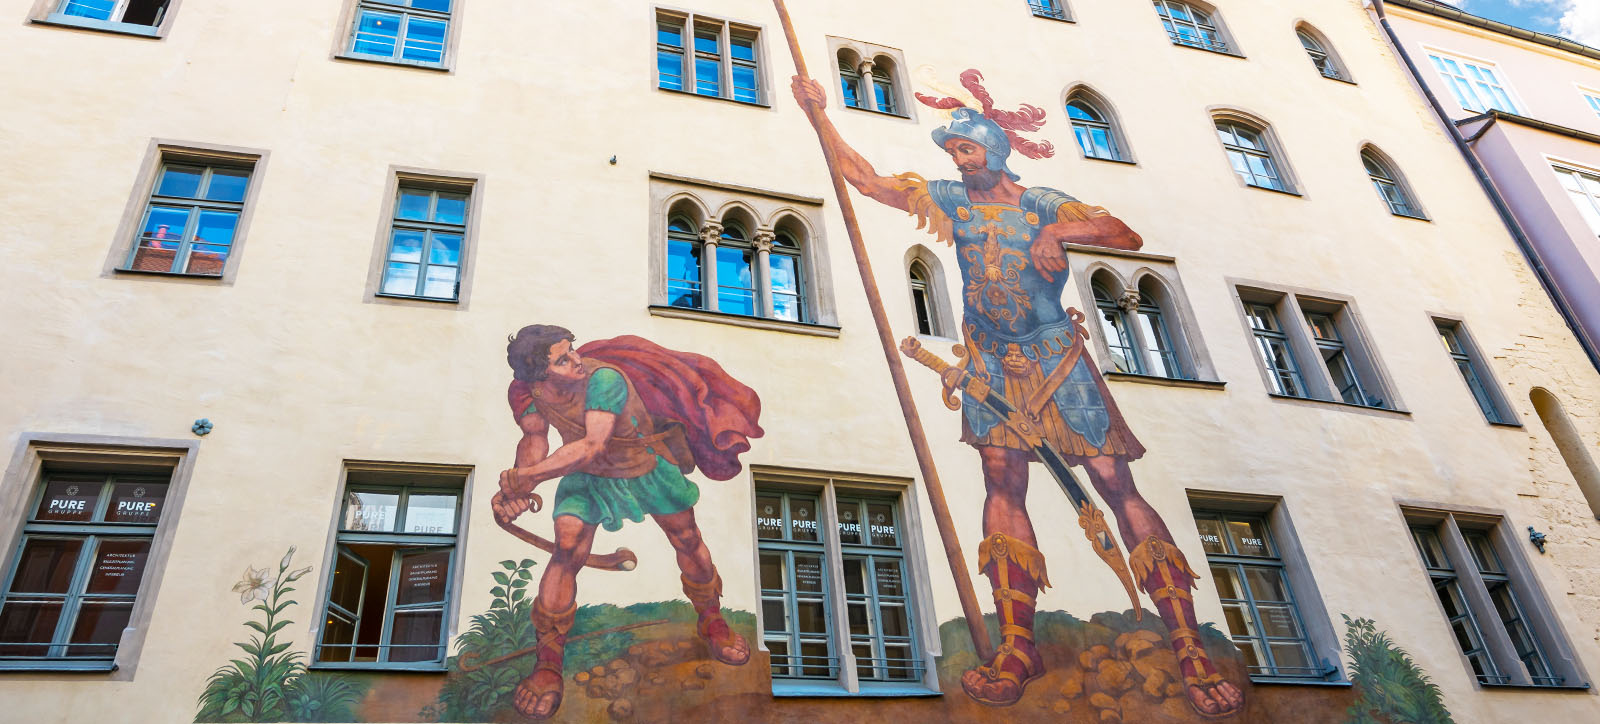 A mural of David defeating Goliath